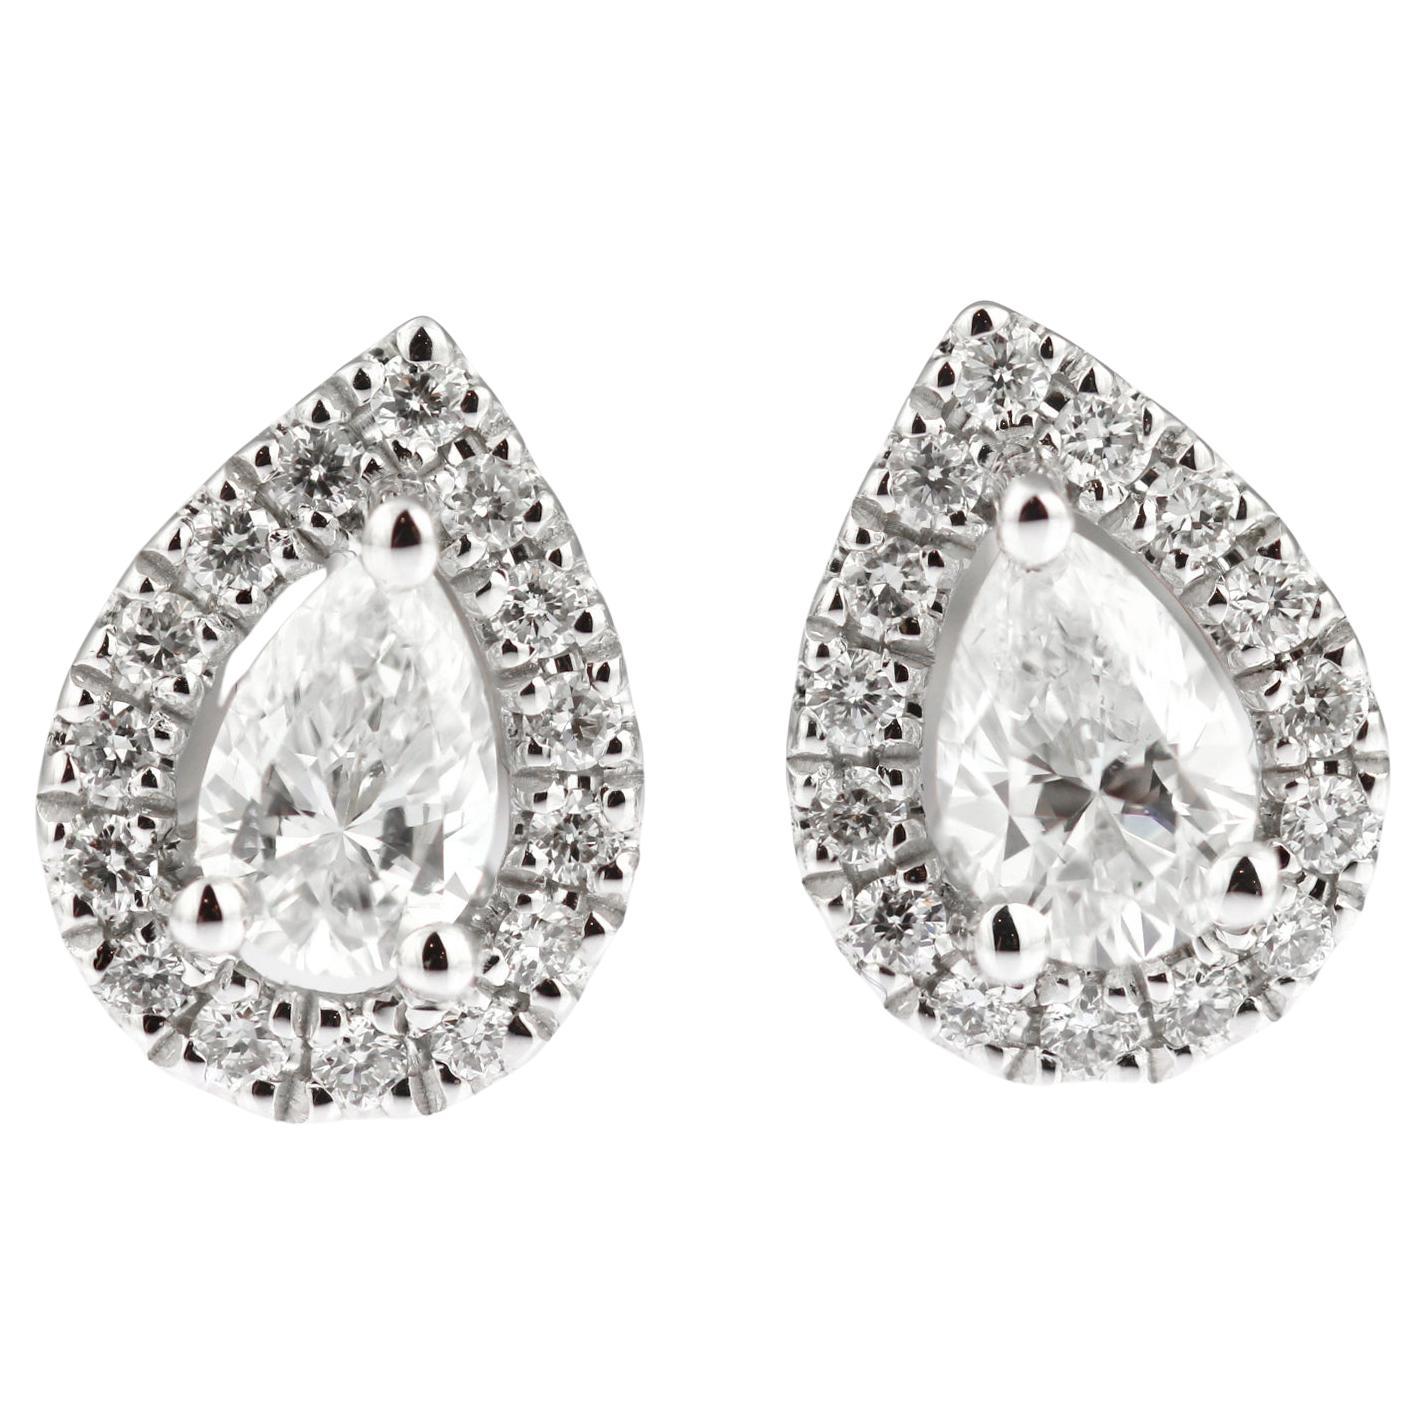 18ct White Gold Contemporary Pearshape Diamond Stud Earrings